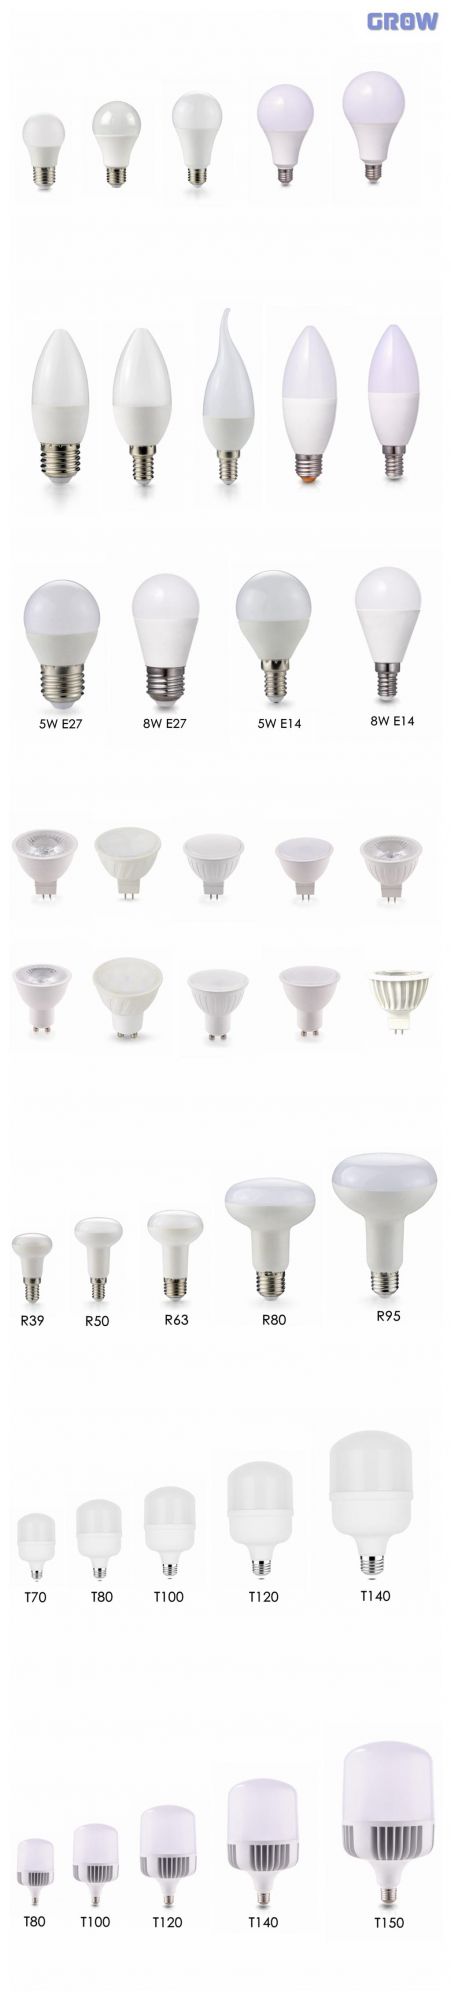 LED Reflector R120 20W LED Light Lamp with CE RoHS for Indoor Lighting